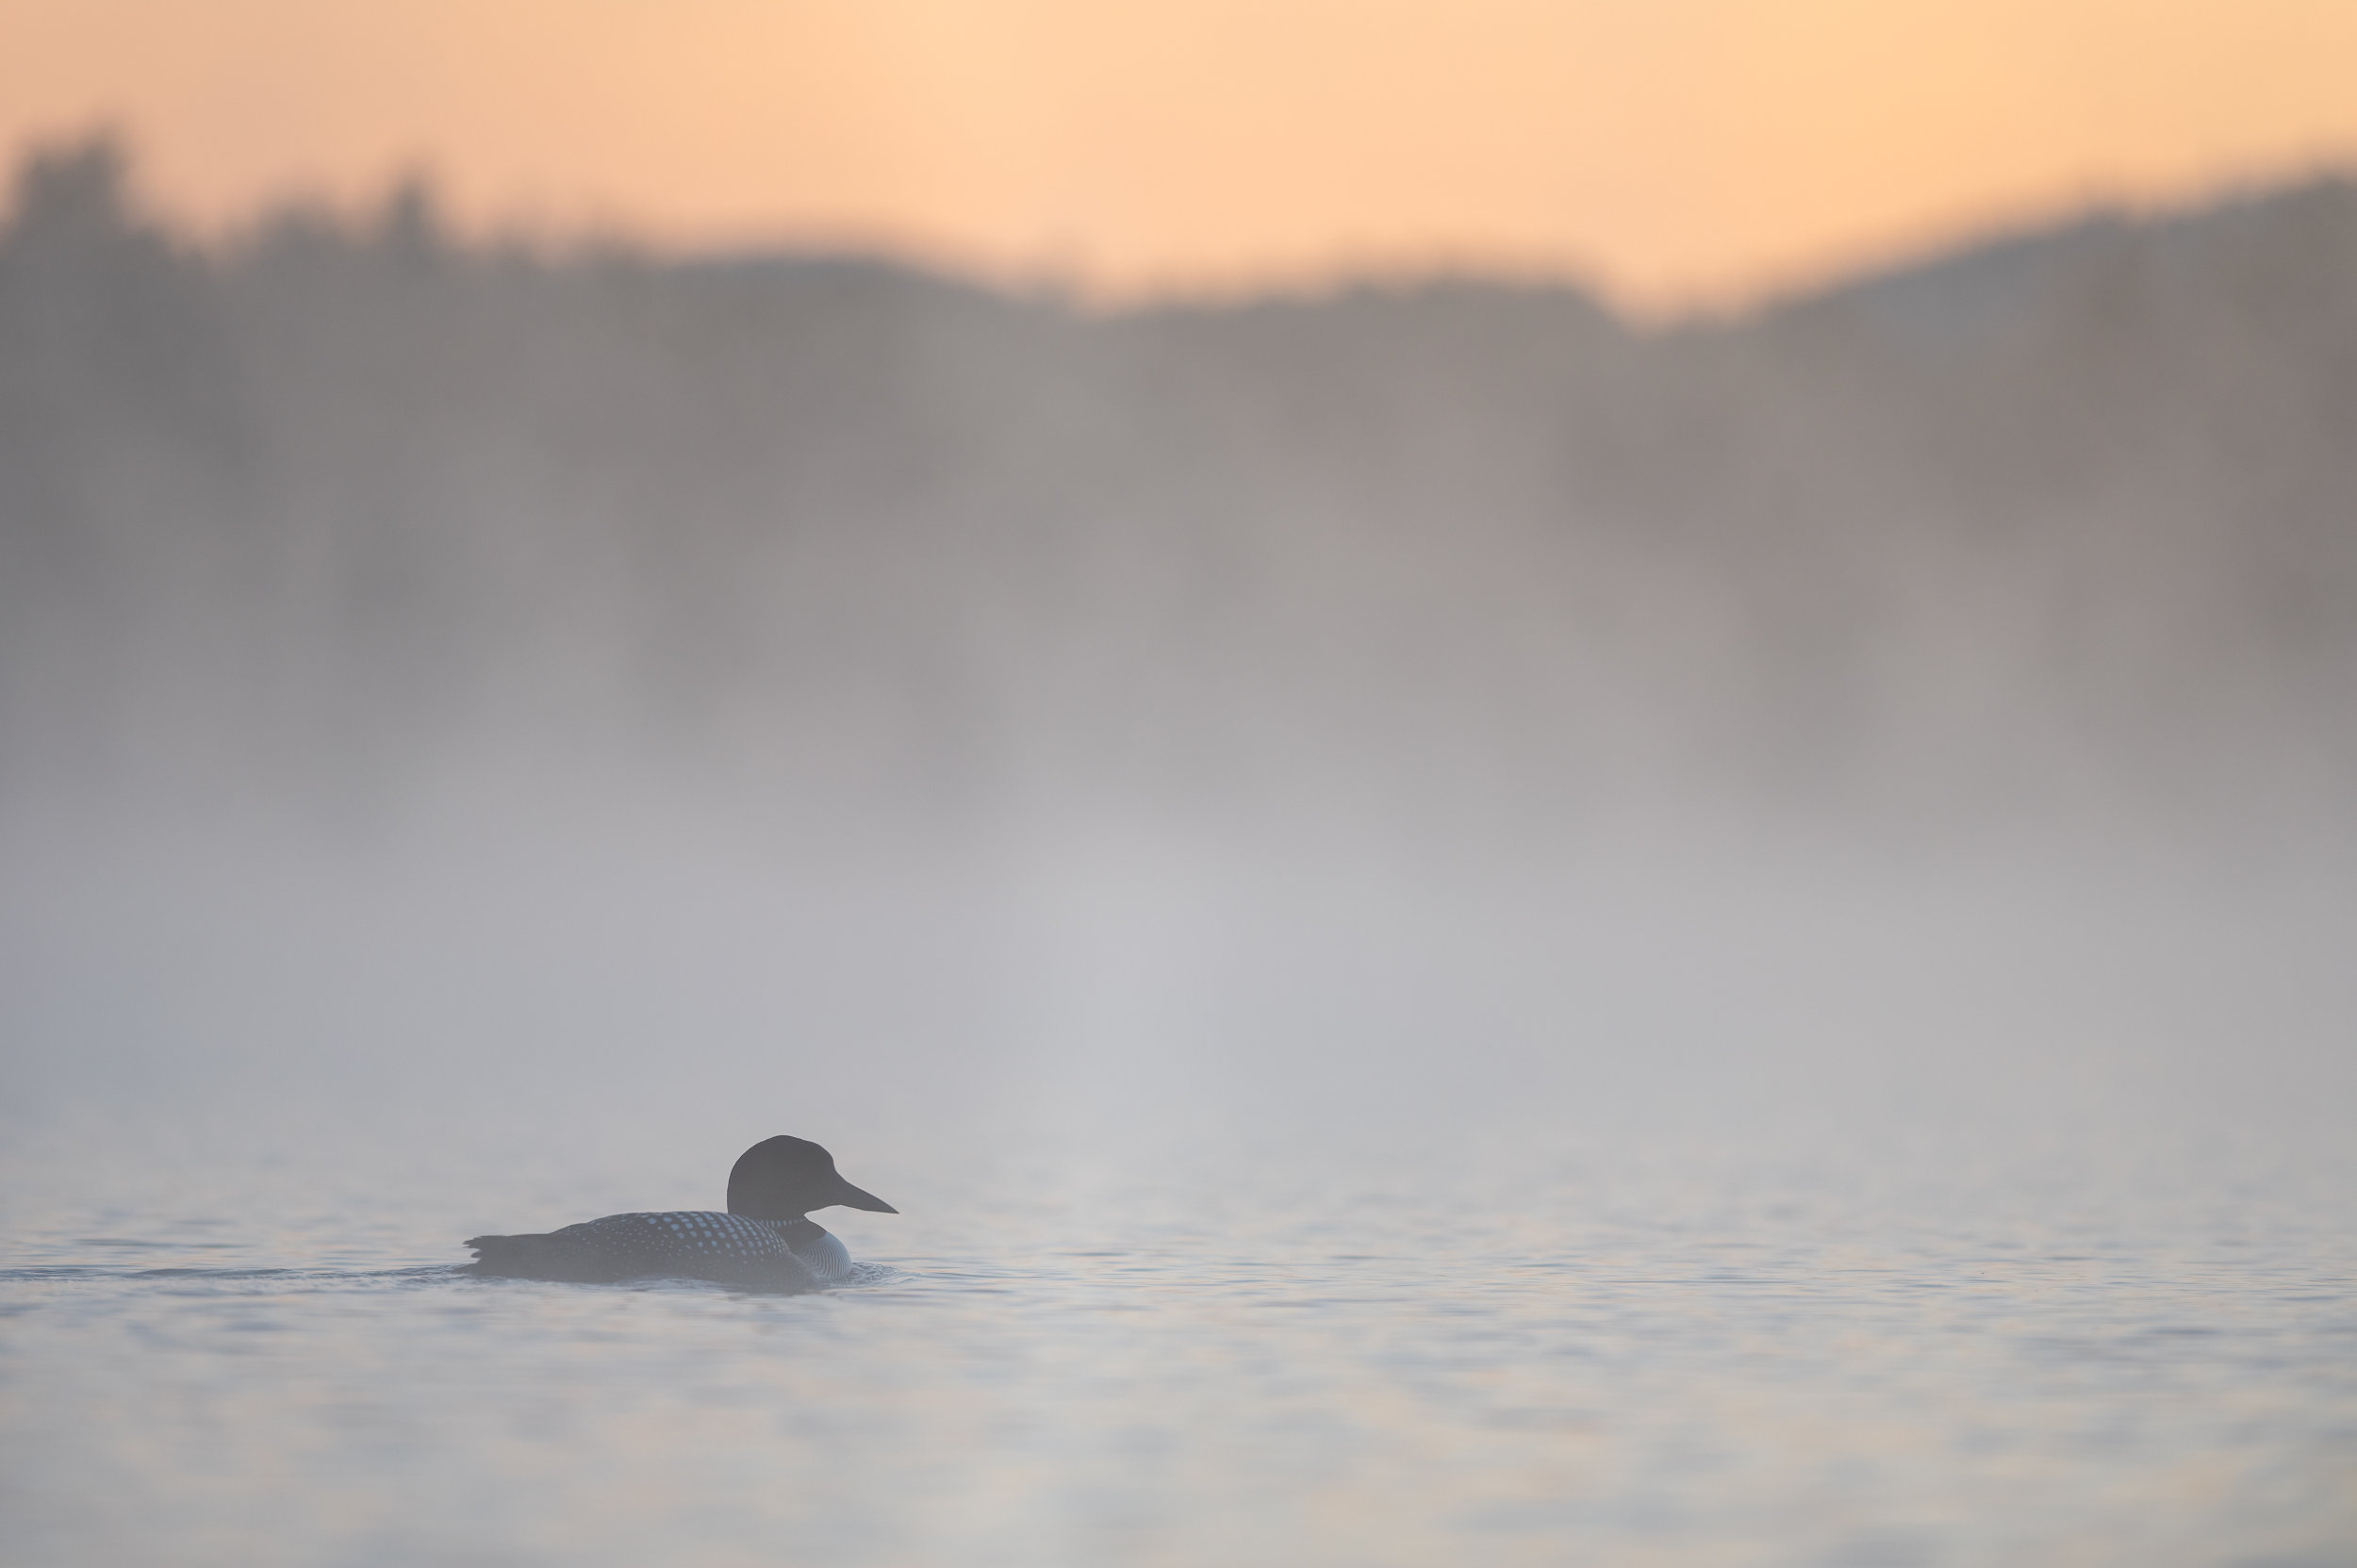 a photo of an adult Common Loon in a foggy pond, with early sunrise colors peaking over the hills and trees in the distance. the mist rising off the water and the bird's head angled down give the image a somber tone...notably, this image was taken during a morning i discovered that this loon's offspring had been killed by a predator